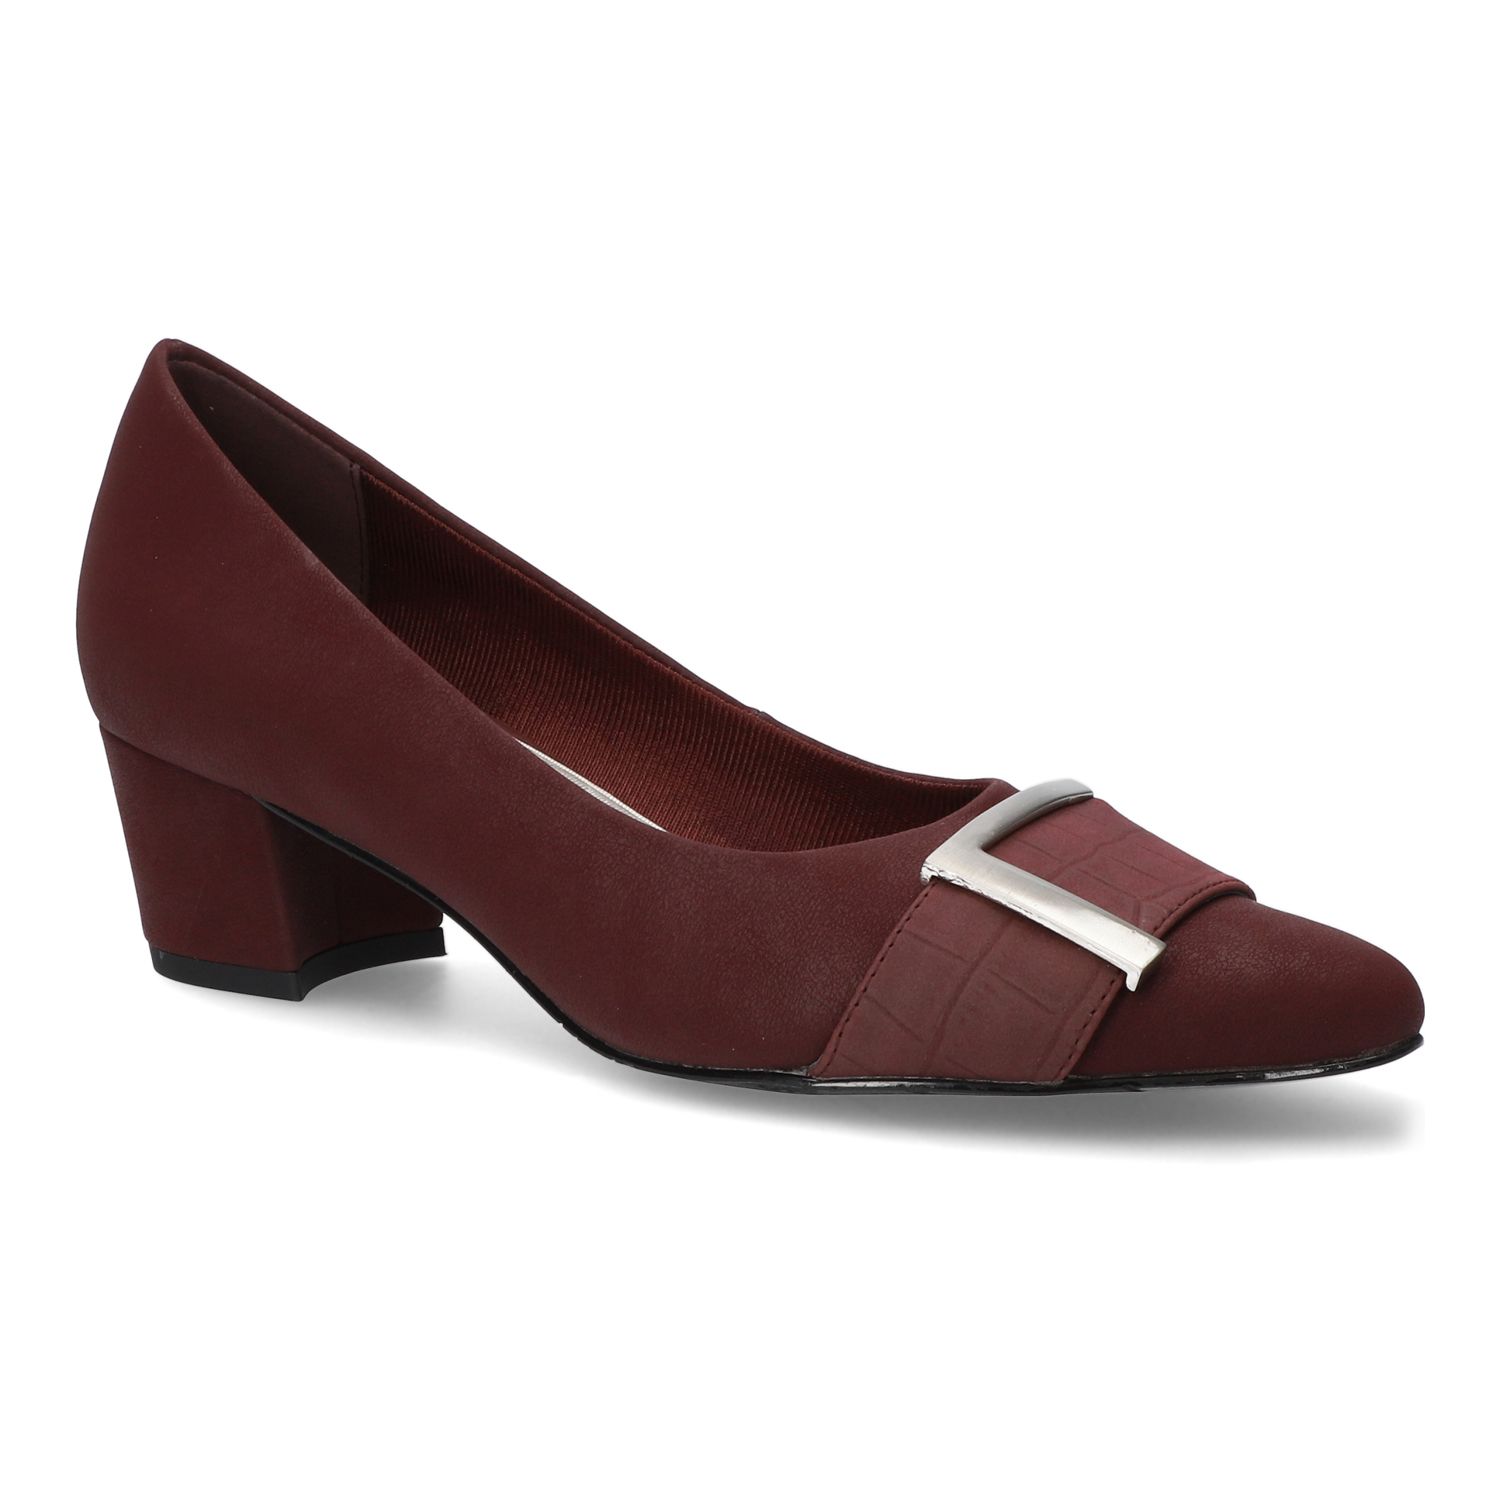 Image for Easy Street Cariel Women's Overlay Pumps at Kohl's.